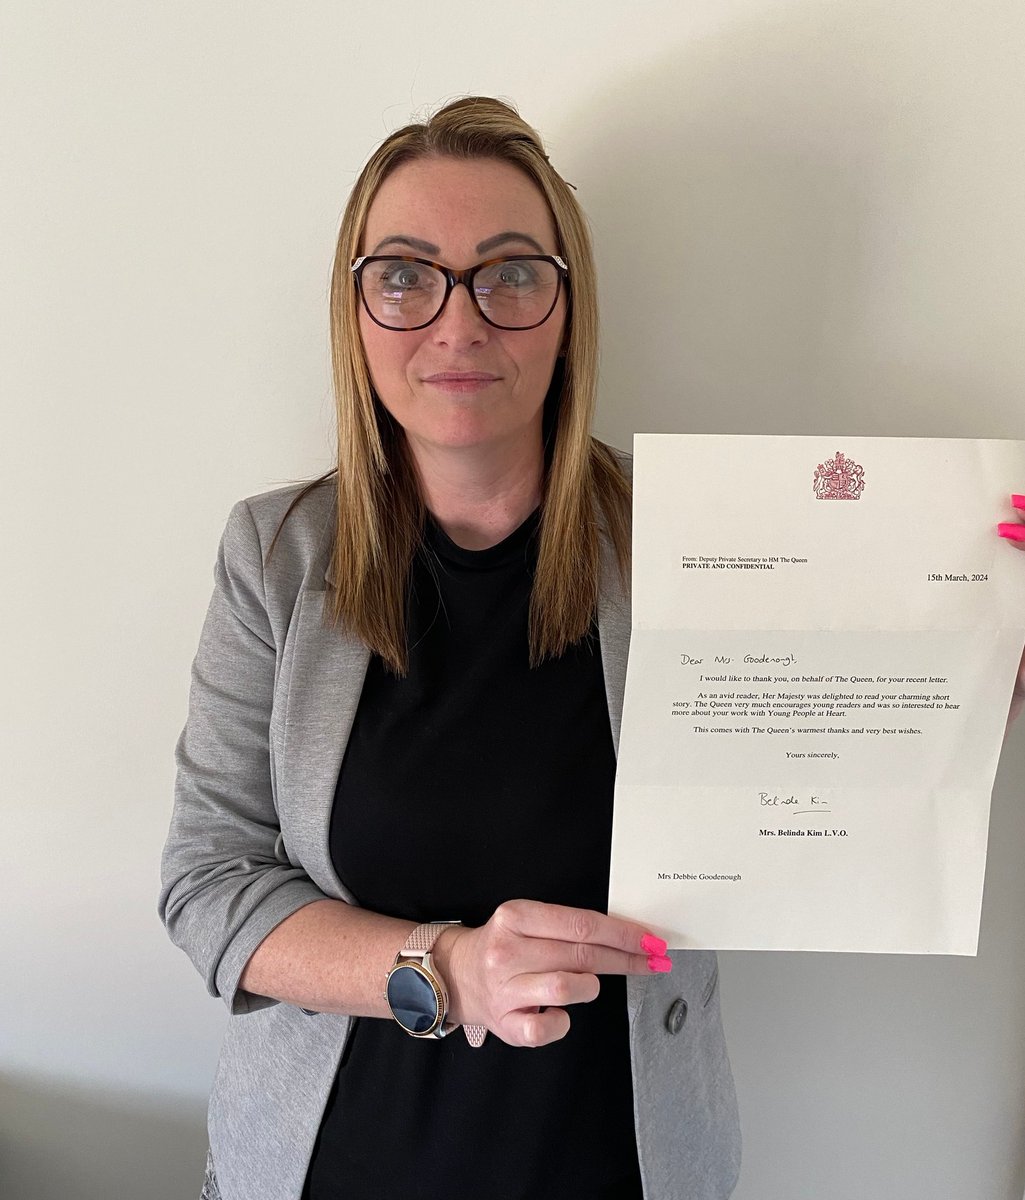 Debbie was so proud of our collective story she took it upon herself to send it to the Patron of @Literacy_Trust, Queen Camilla. Receiving a reply from Buckingham Palace, we are pleased to say that our story has got the royal seal of approval!